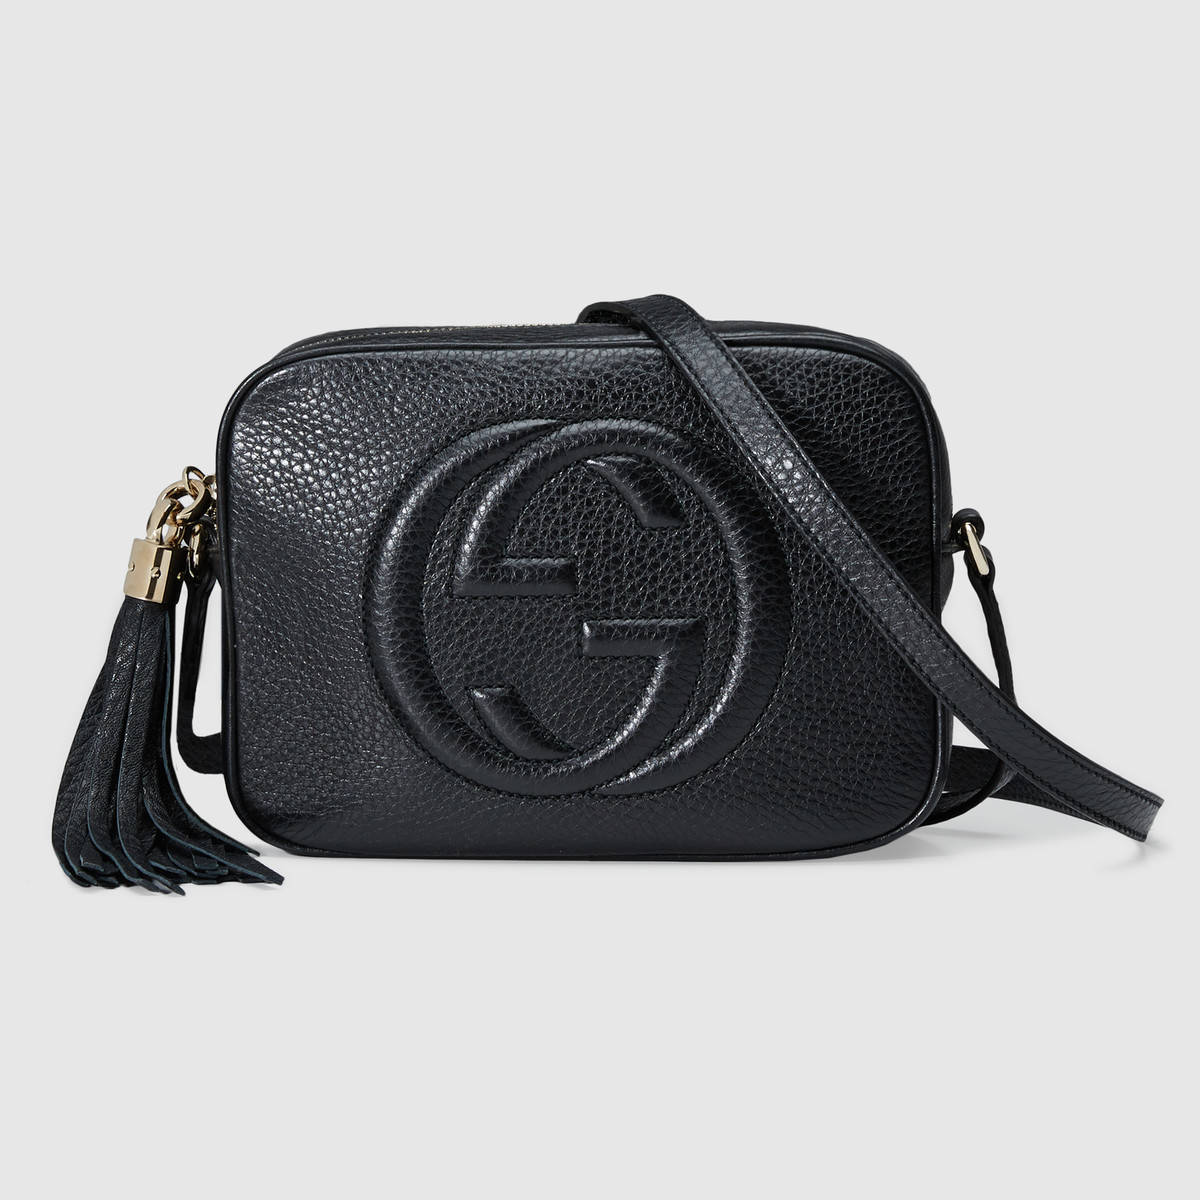 Gucci Soho Small Leather Disco Bag in Smooth Calfskin Leather - LULUX